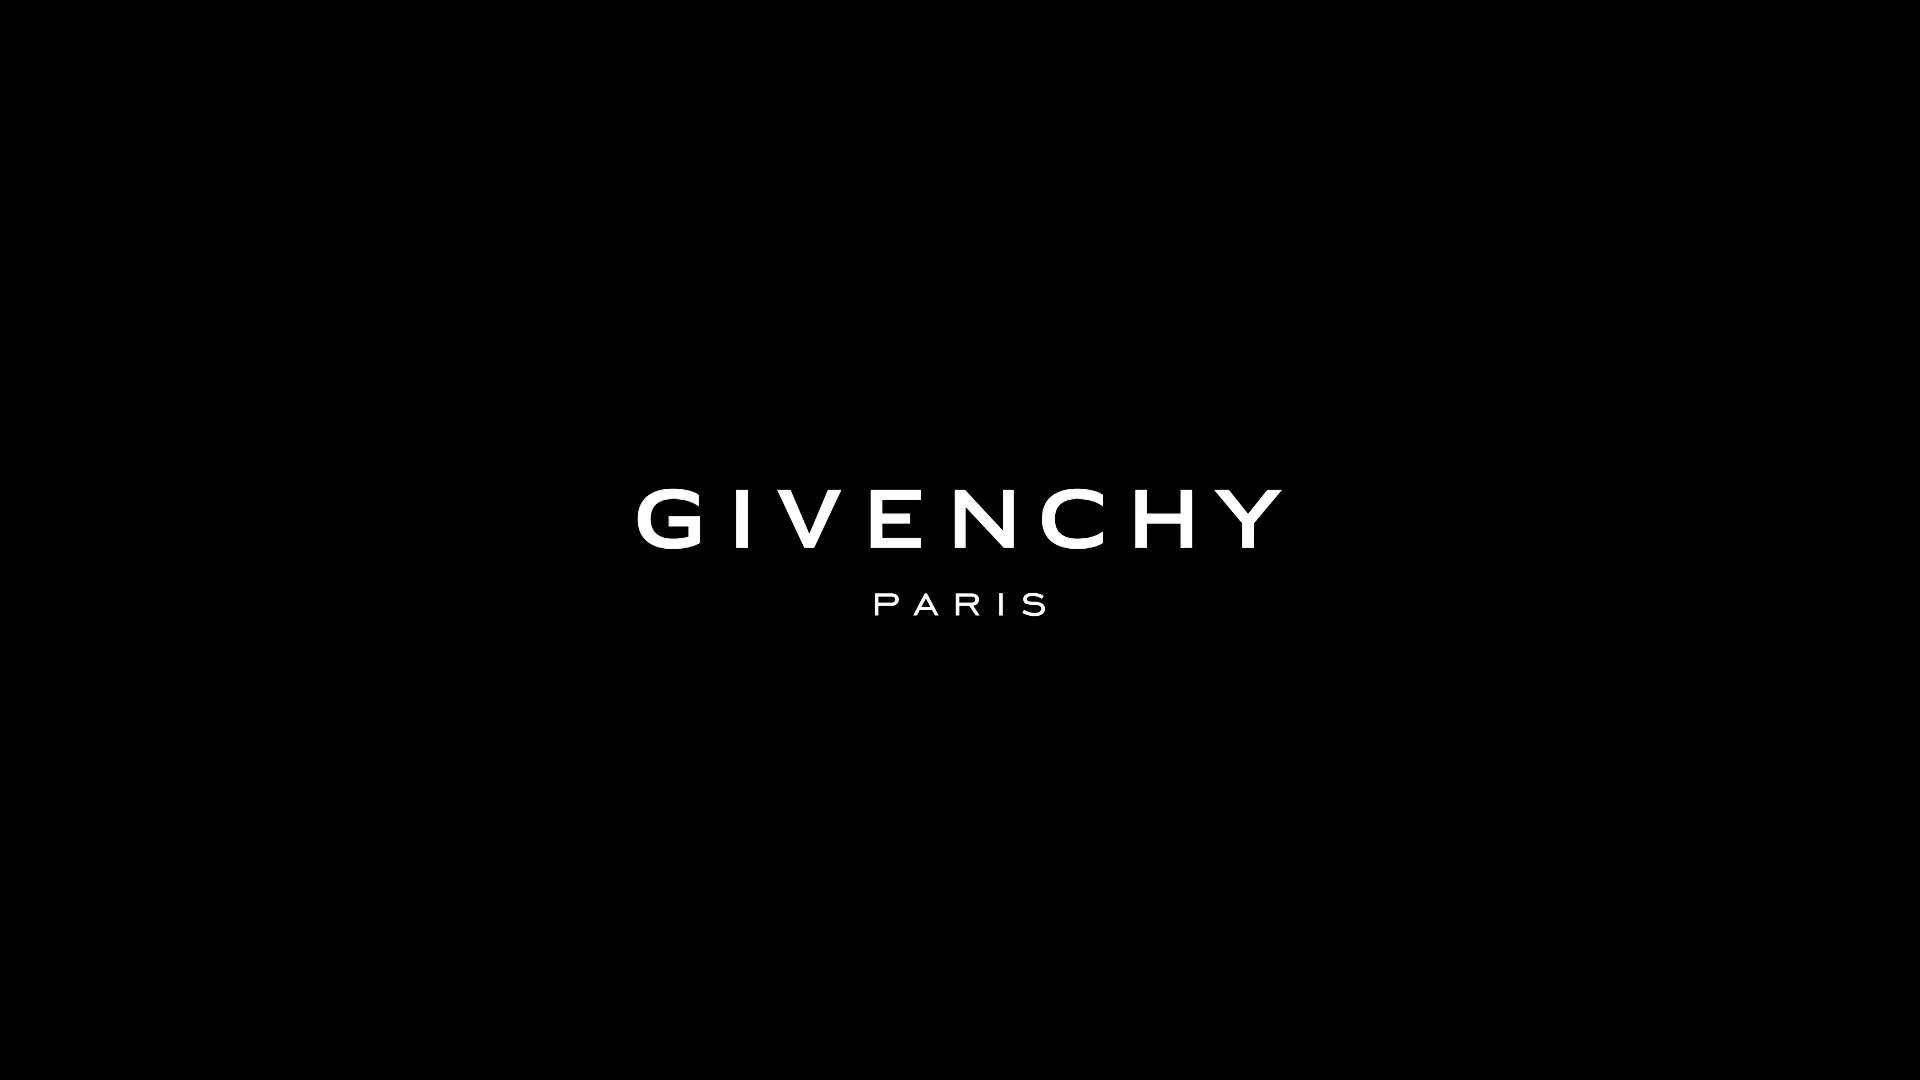 Givenchy Wallpapers - 4k, HD Givenchy Backgrounds on WallpaperBat